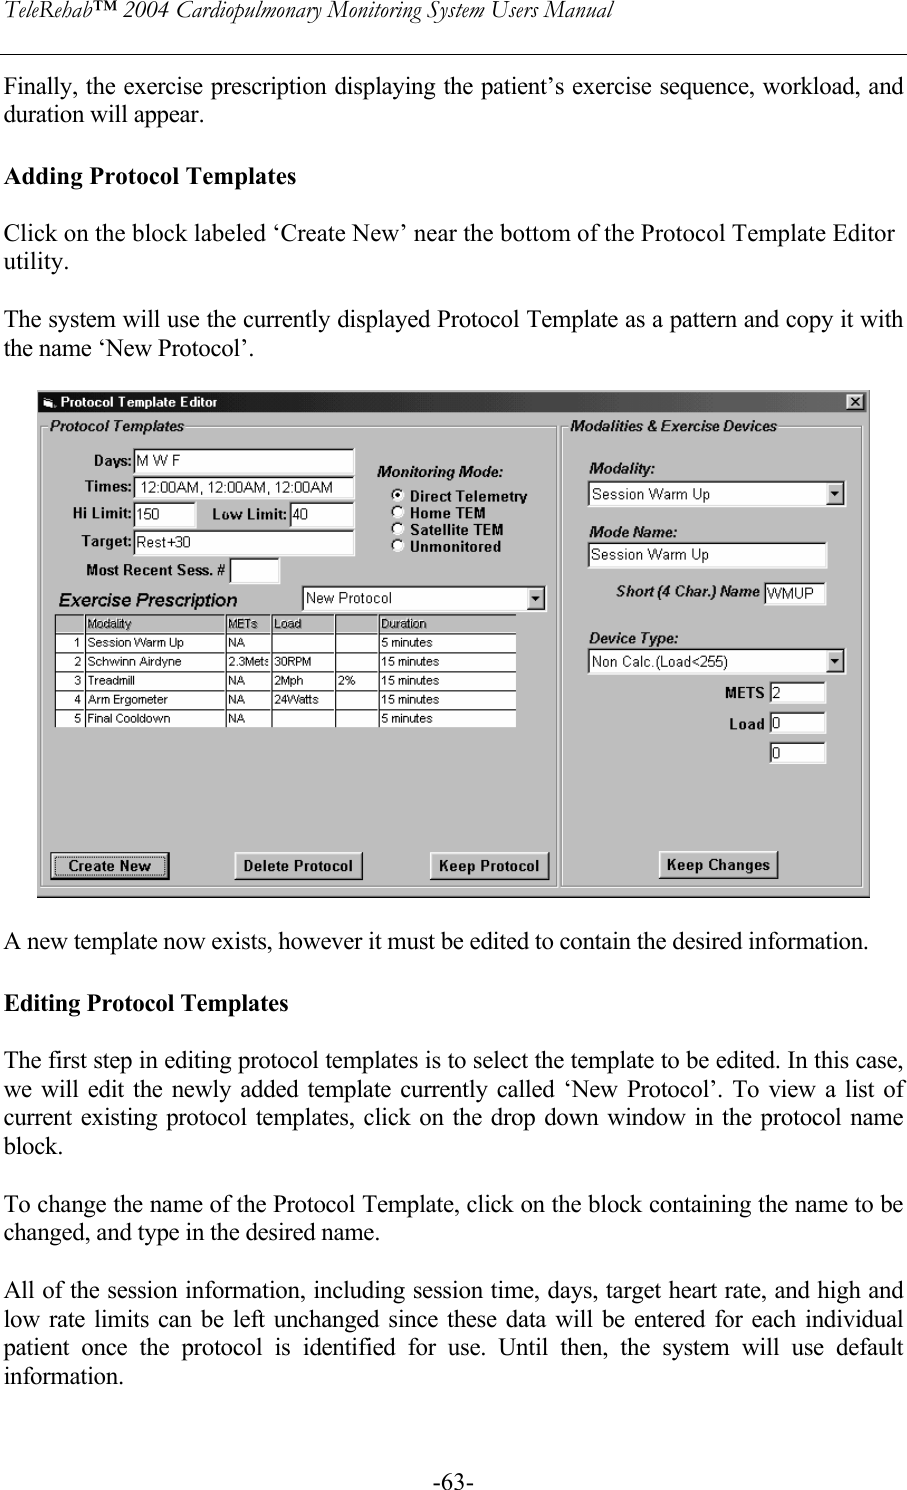 TeleRehab™ 2004 Cardiopulmonary Monitoring System Users Manual    -63-Finally, the exercise prescription displaying the patient’s exercise sequence, workload, and duration will appear.  Adding Protocol Templates  Click on the block labeled ‘Create New’ near the bottom of the Protocol Template Editor utility.   The system will use the currently displayed Protocol Template as a pattern and copy it with the name ‘New Protocol’.    A new template now exists, however it must be edited to contain the desired information.   Editing Protocol Templates  The first step in editing protocol templates is to select the template to be edited. In this case, we will edit the newly added template currently called ‘New Protocol’. To view a list of current existing protocol templates, click on the drop down window in the protocol name block.  To change the name of the Protocol Template, click on the block containing the name to be changed, and type in the desired name.  All of the session information, including session time, days, target heart rate, and high and low rate limits can be left unchanged since these data will be entered for each individual patient once the protocol is identified for use. Until then, the system will use default information.  